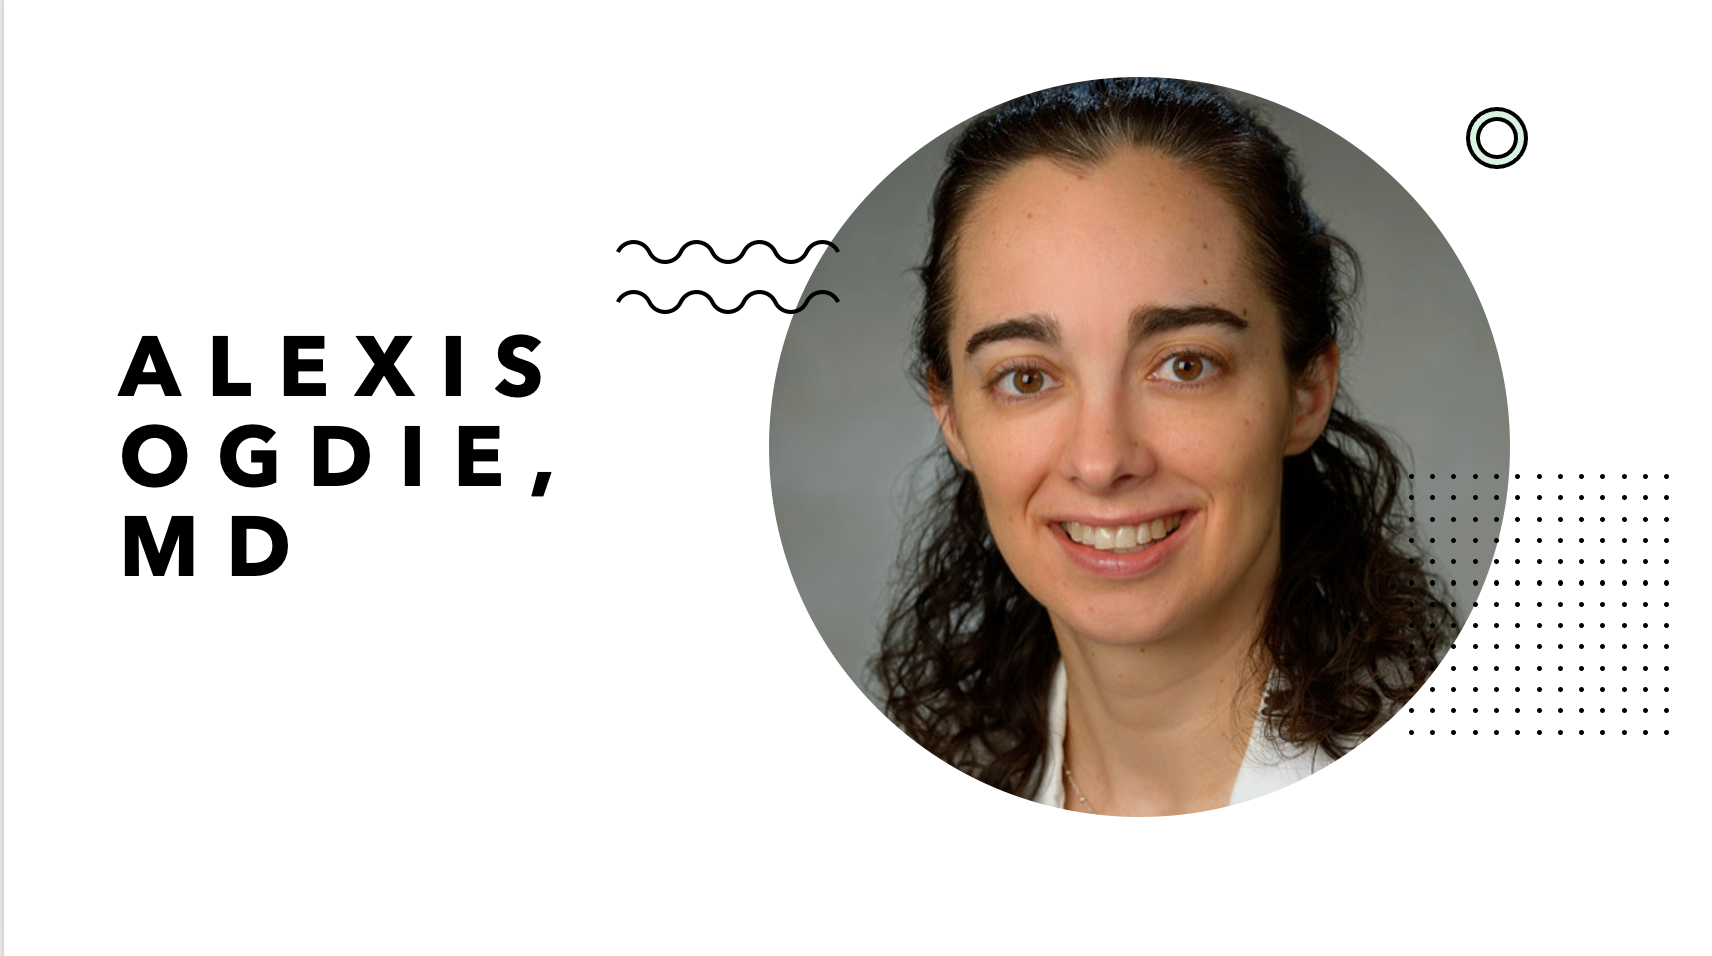 Alexis Ogdie, MD: Importance of Patient Experience in Psoriatic Arthritis Treatment